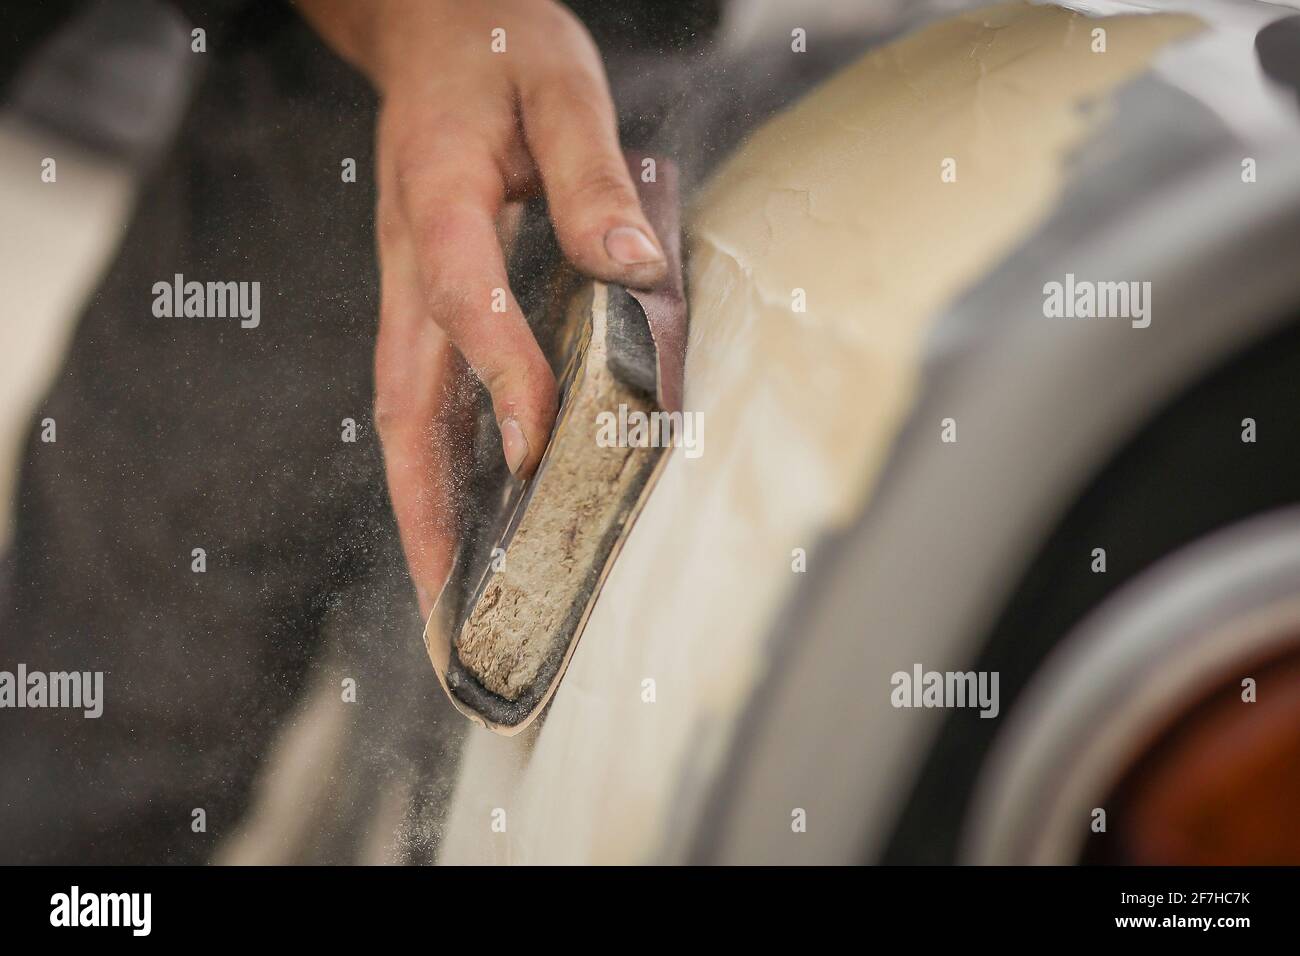 A hand of a man is seen sanding an old vintage car using a block of wood and brown sand grit paper. Manual dry sanding of a car in restoration, a proc Stock Photo